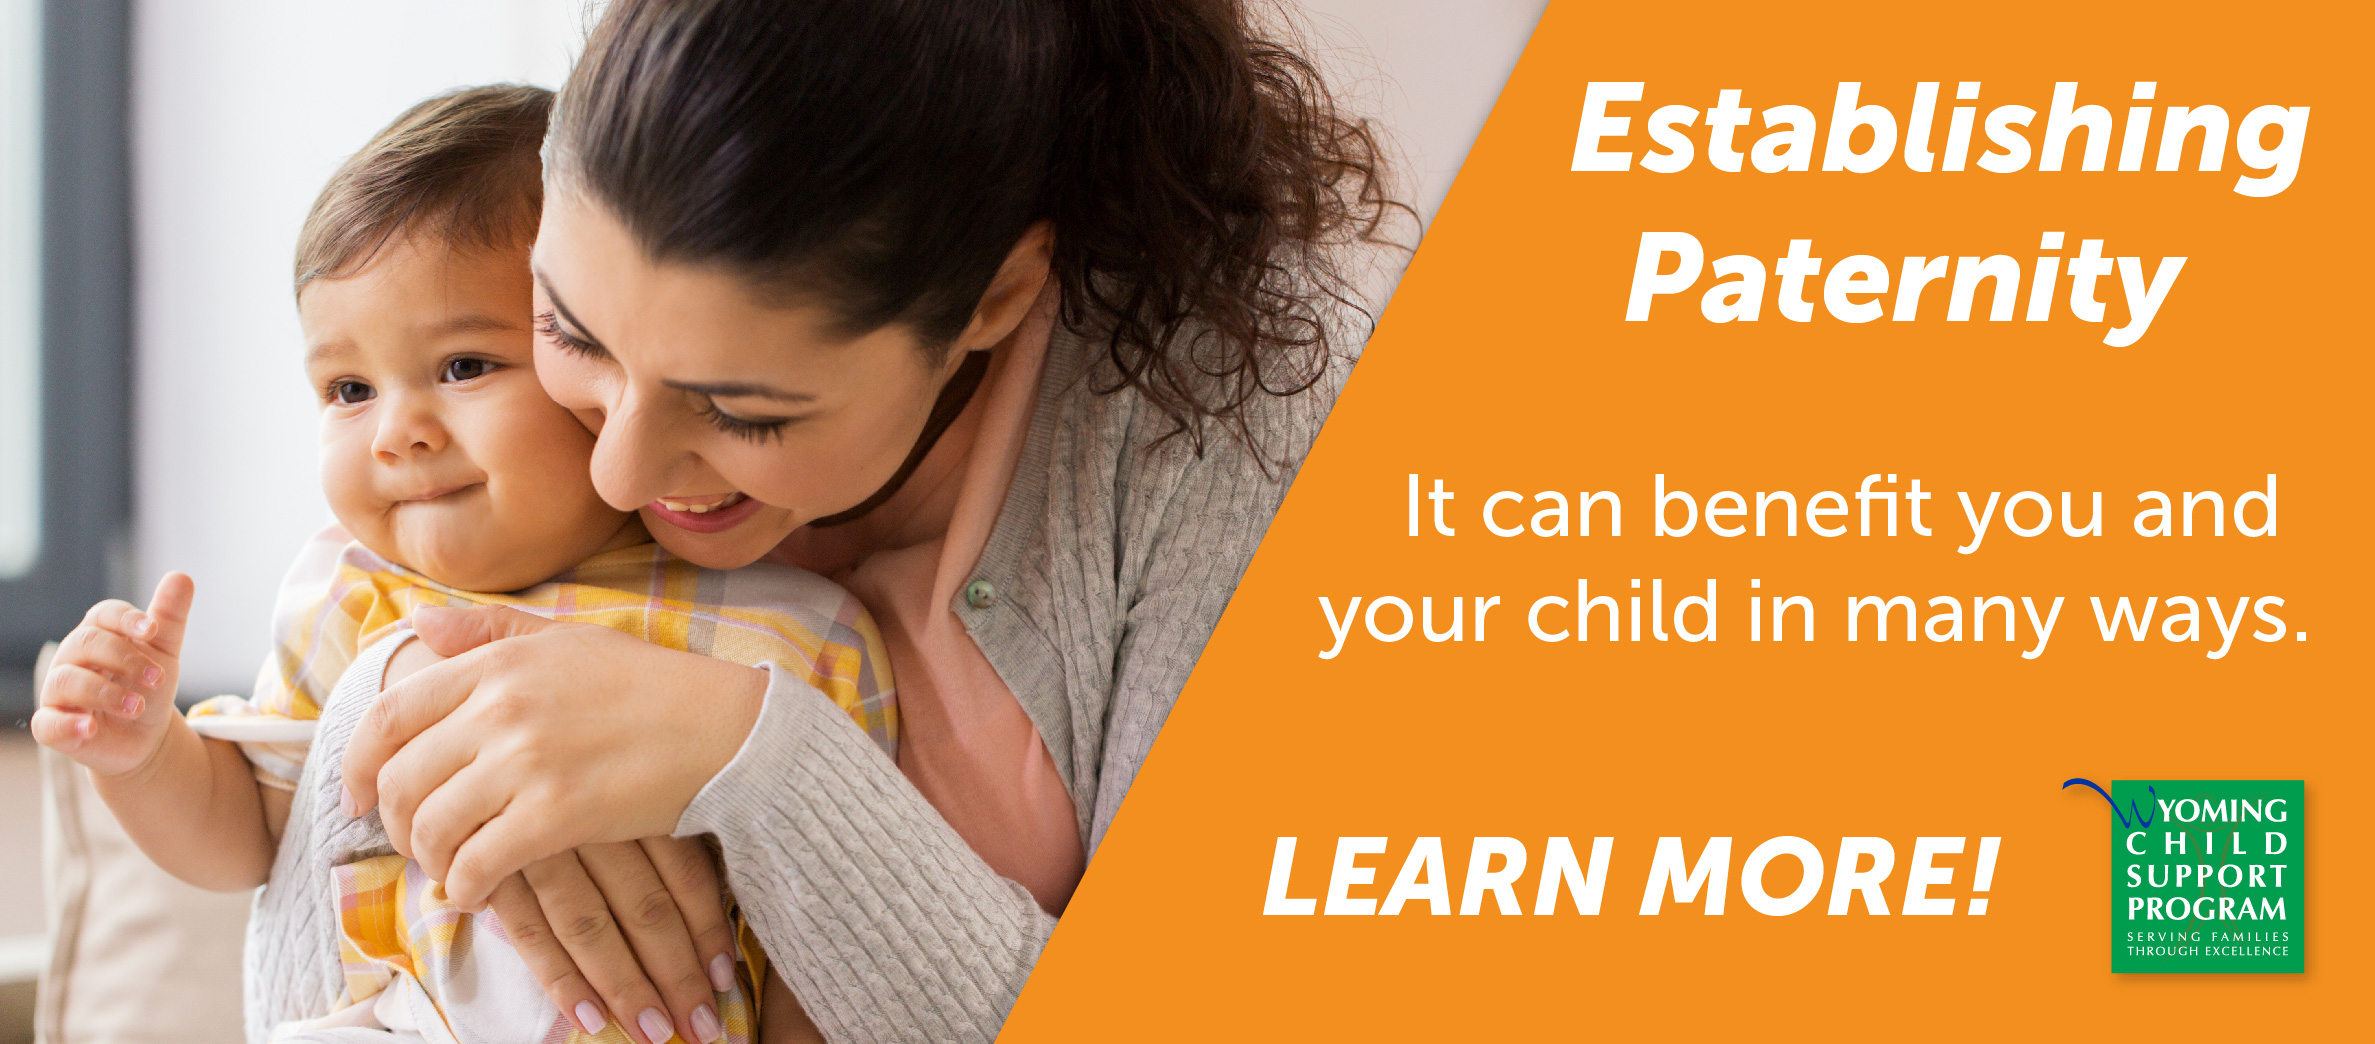 Establishing paternity can help you and your child in many ways.  Click to learn more!